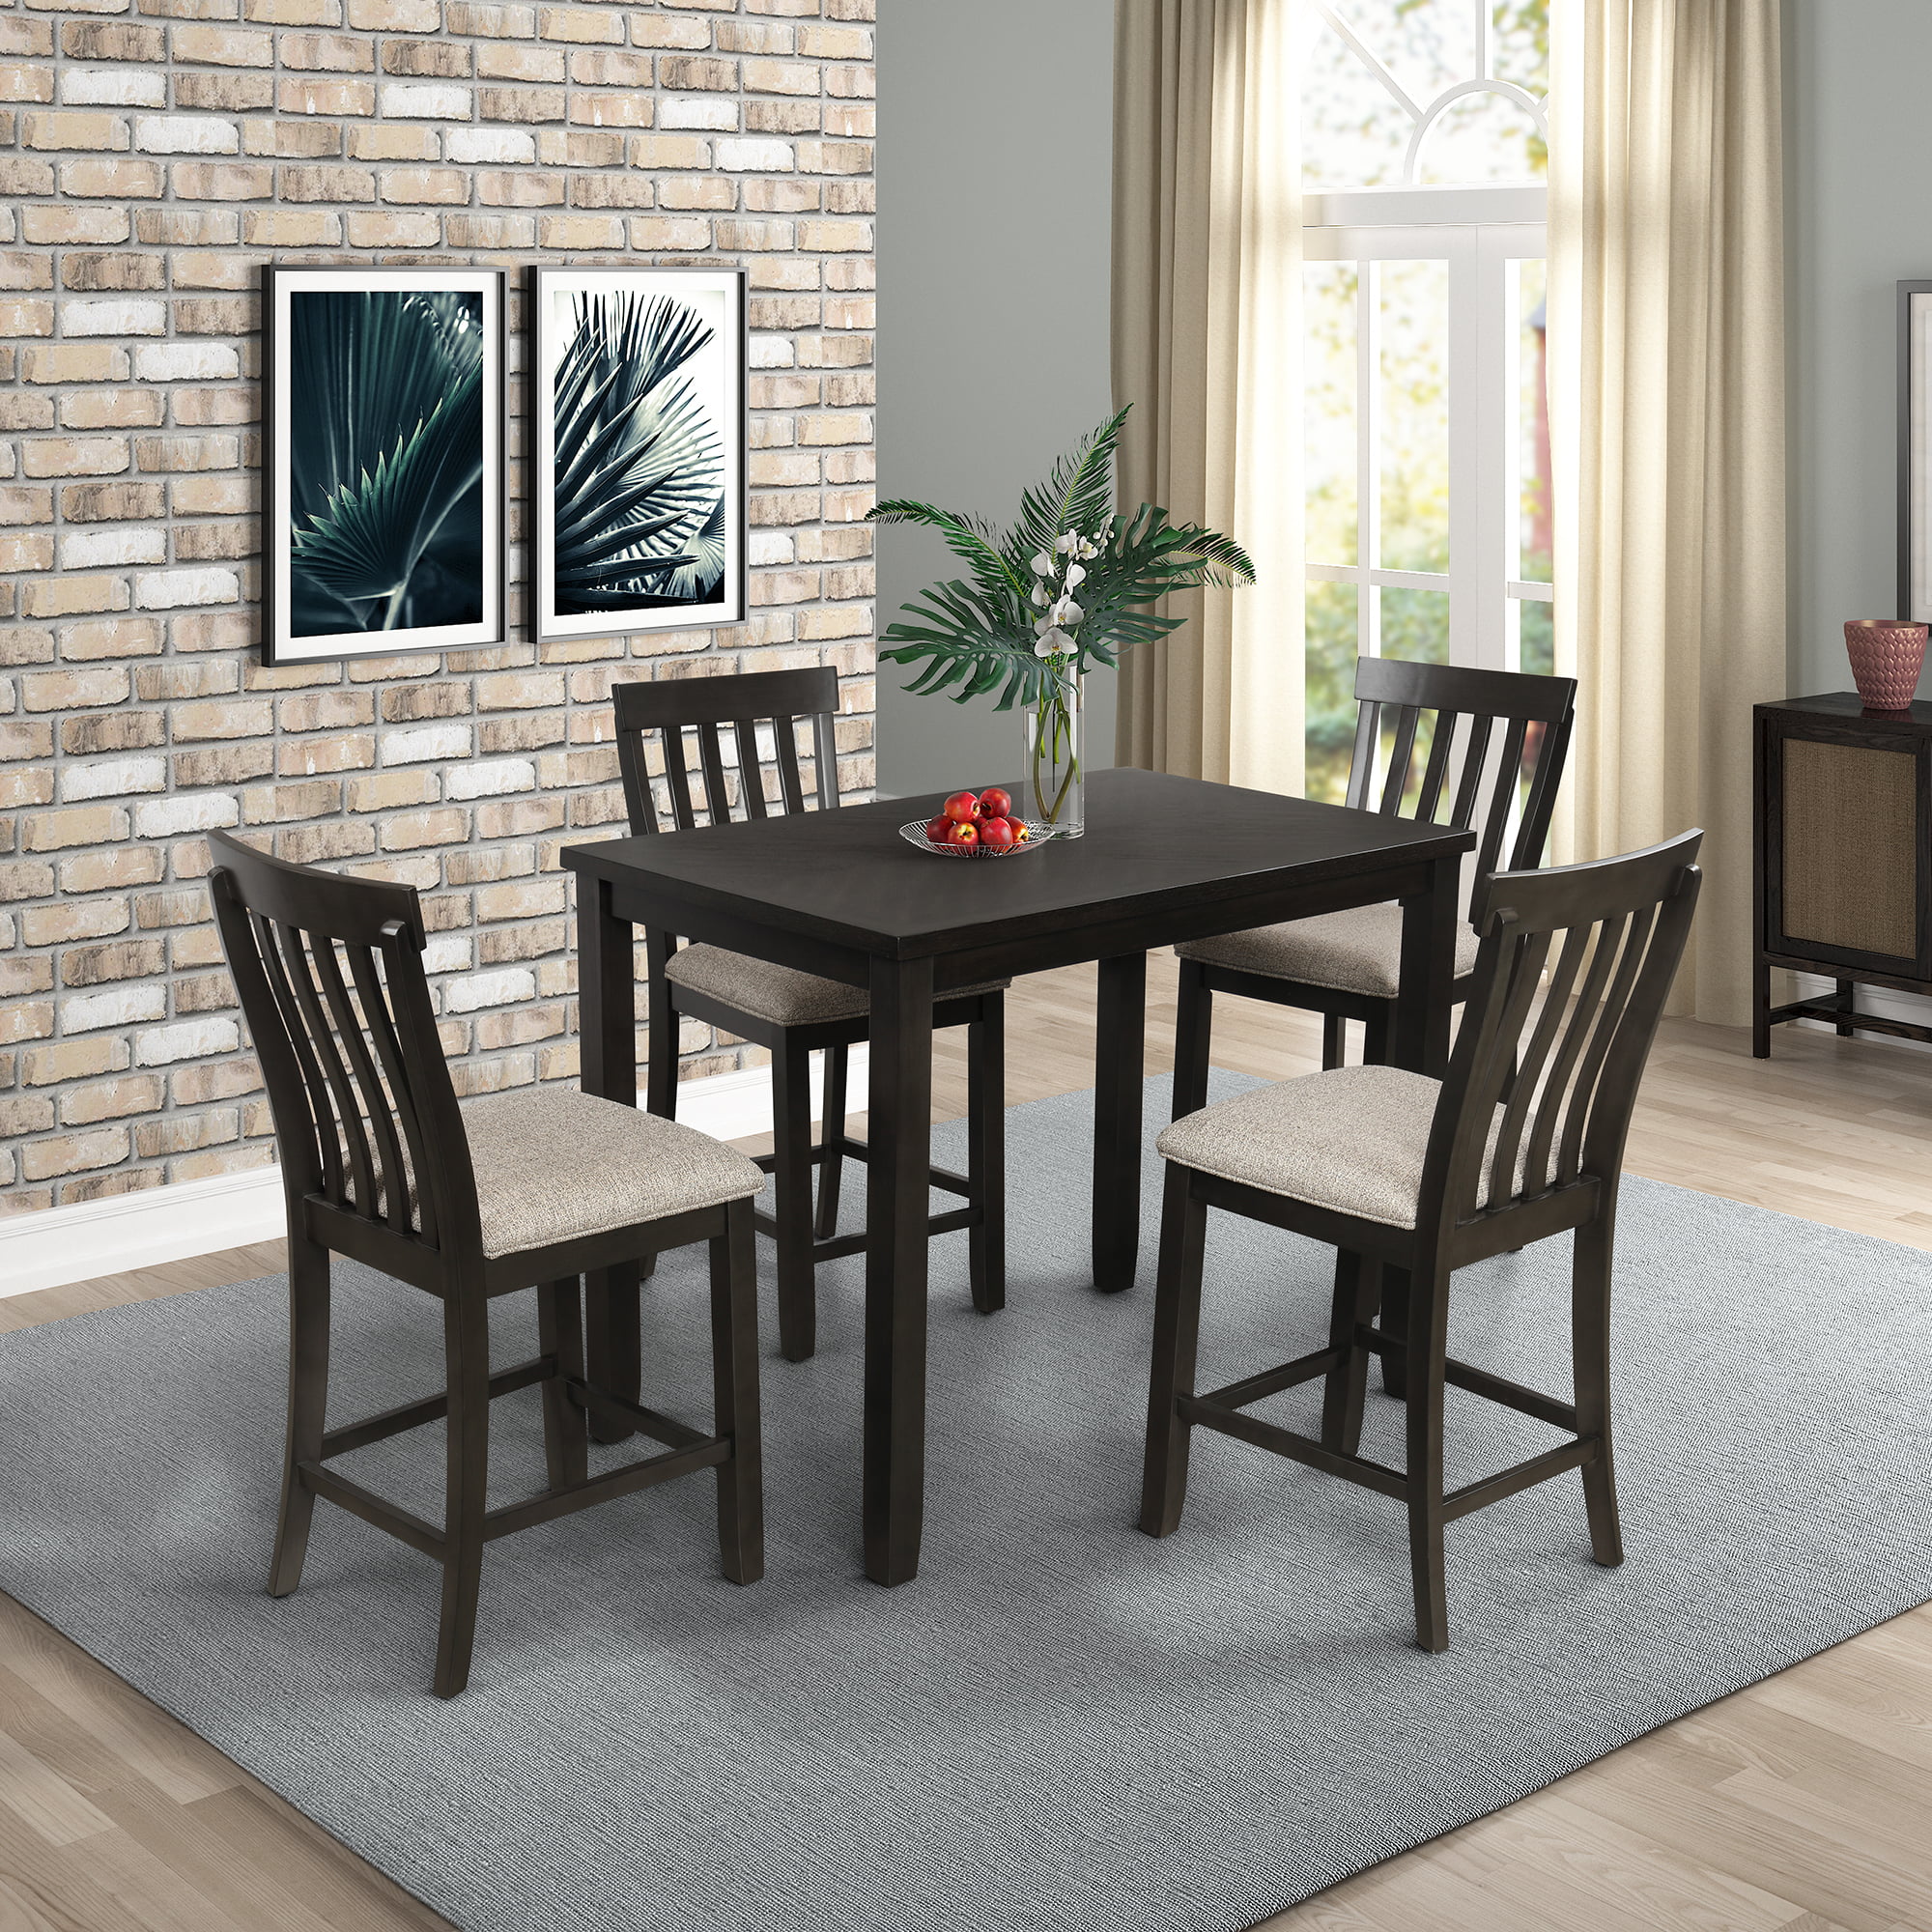 Dining Table Set with 4 Chairs, 5-Piece Wooden Kitchen Table Set ...